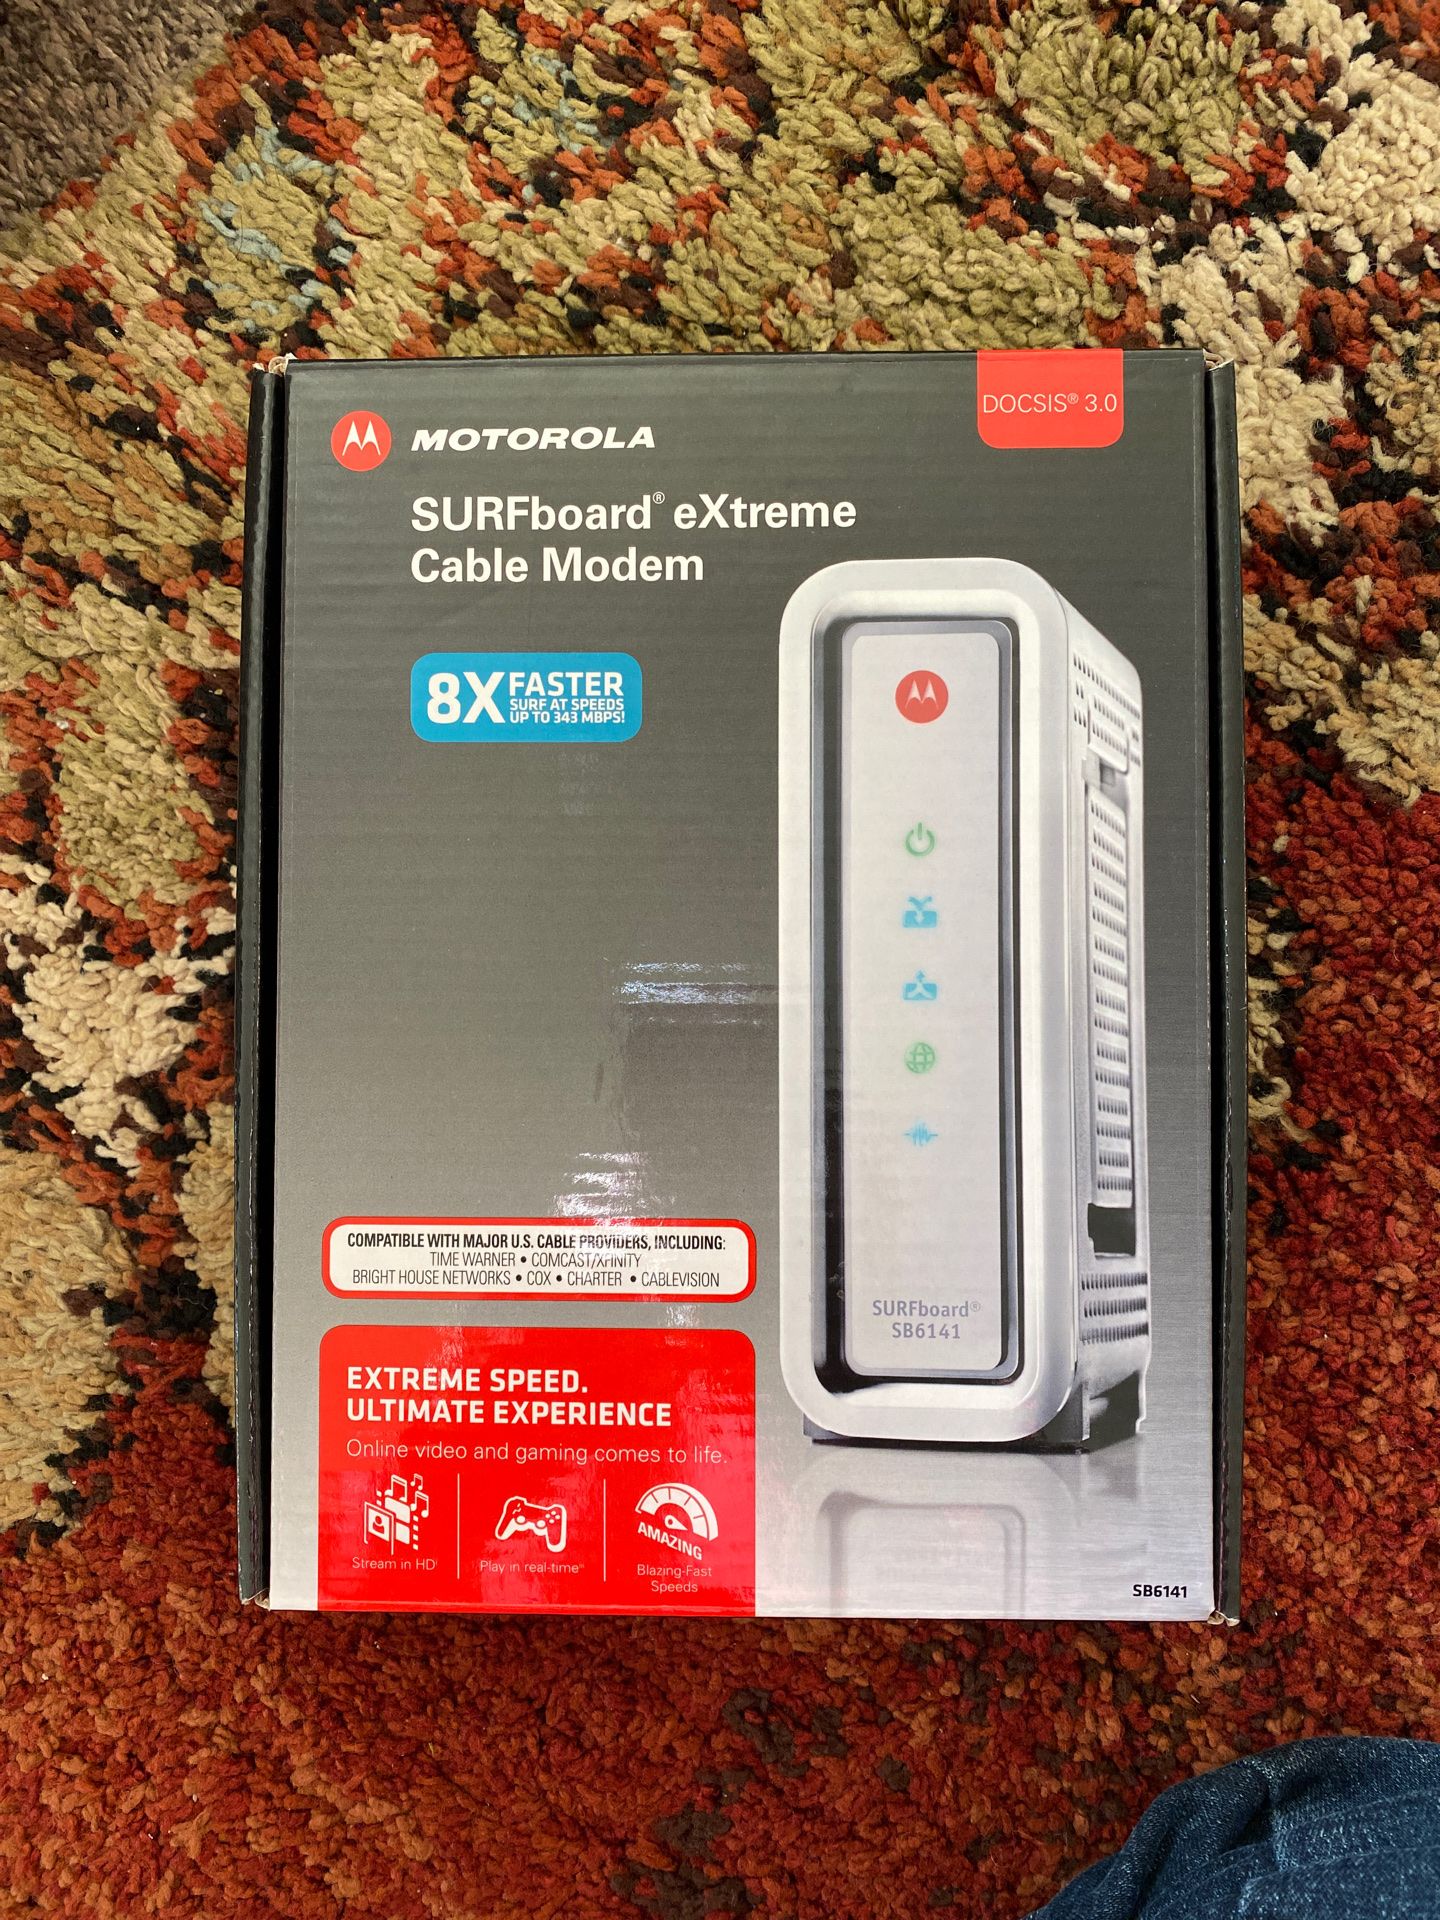 Surfboard sb6141 Cable Modem